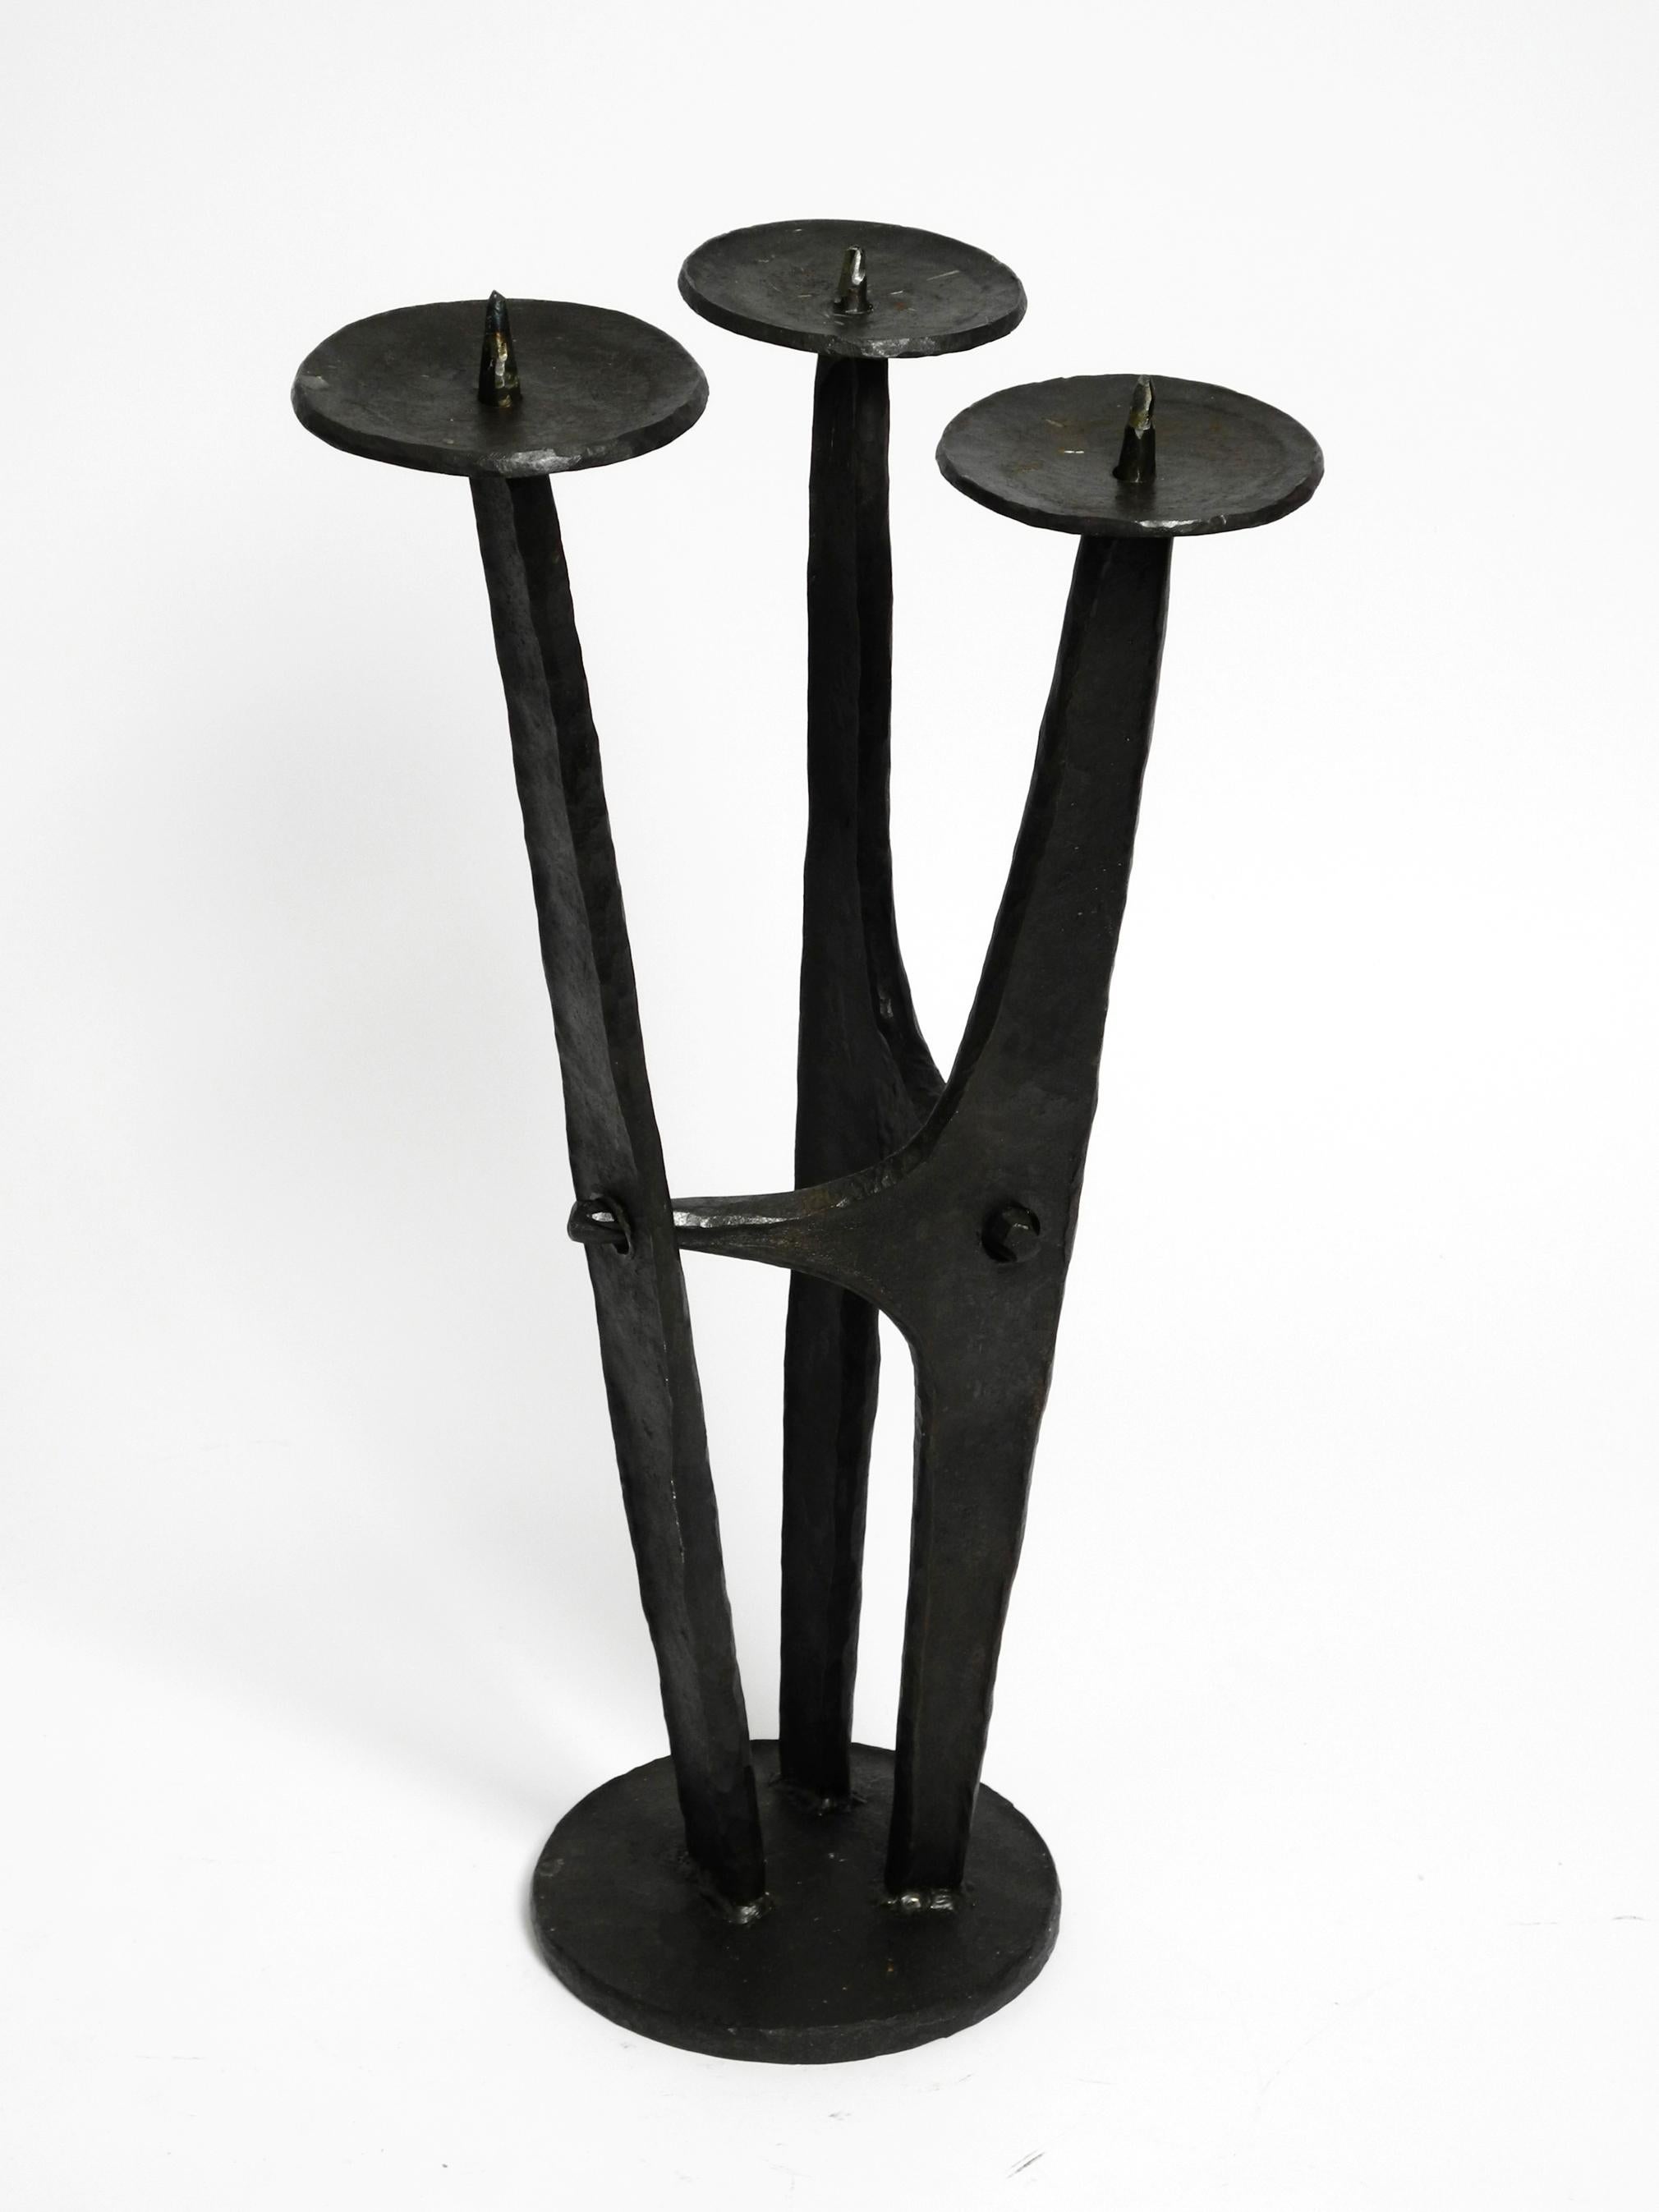 Large, heavy 50s floor candle holder made of wrought iron in Mid Century design For Sale 9